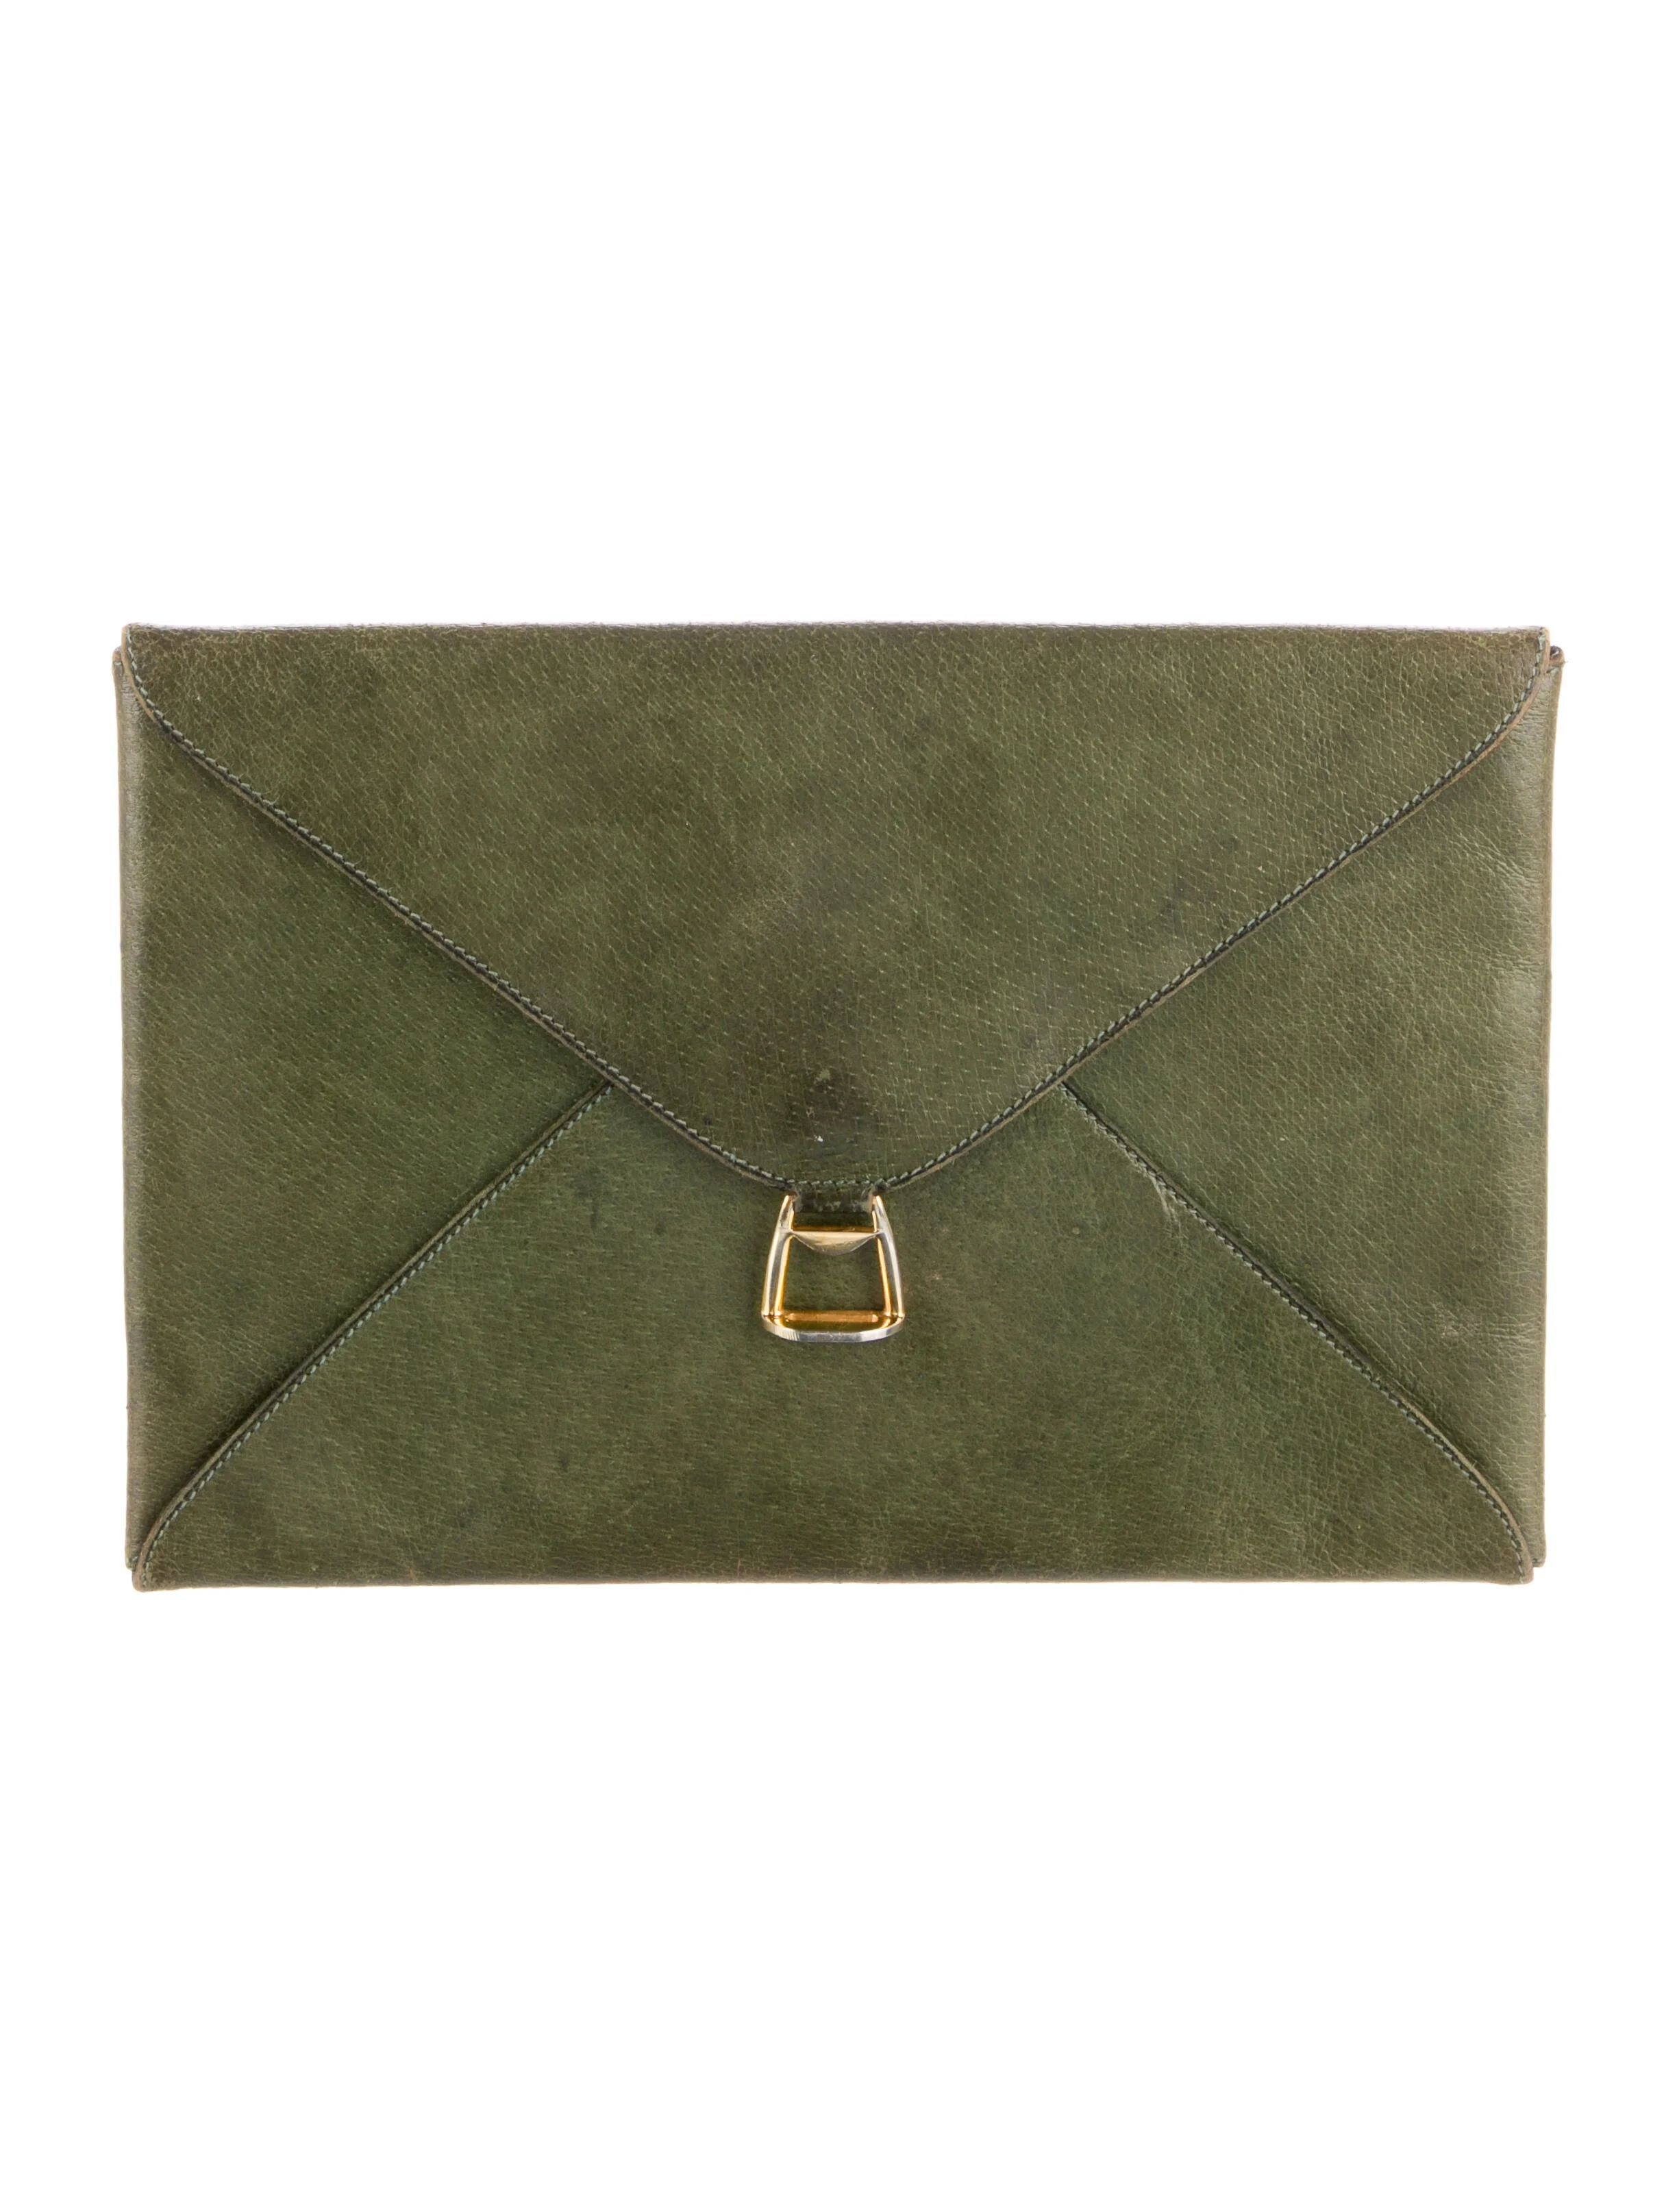 Vintage Leather Envelope Clutch | The RealReal